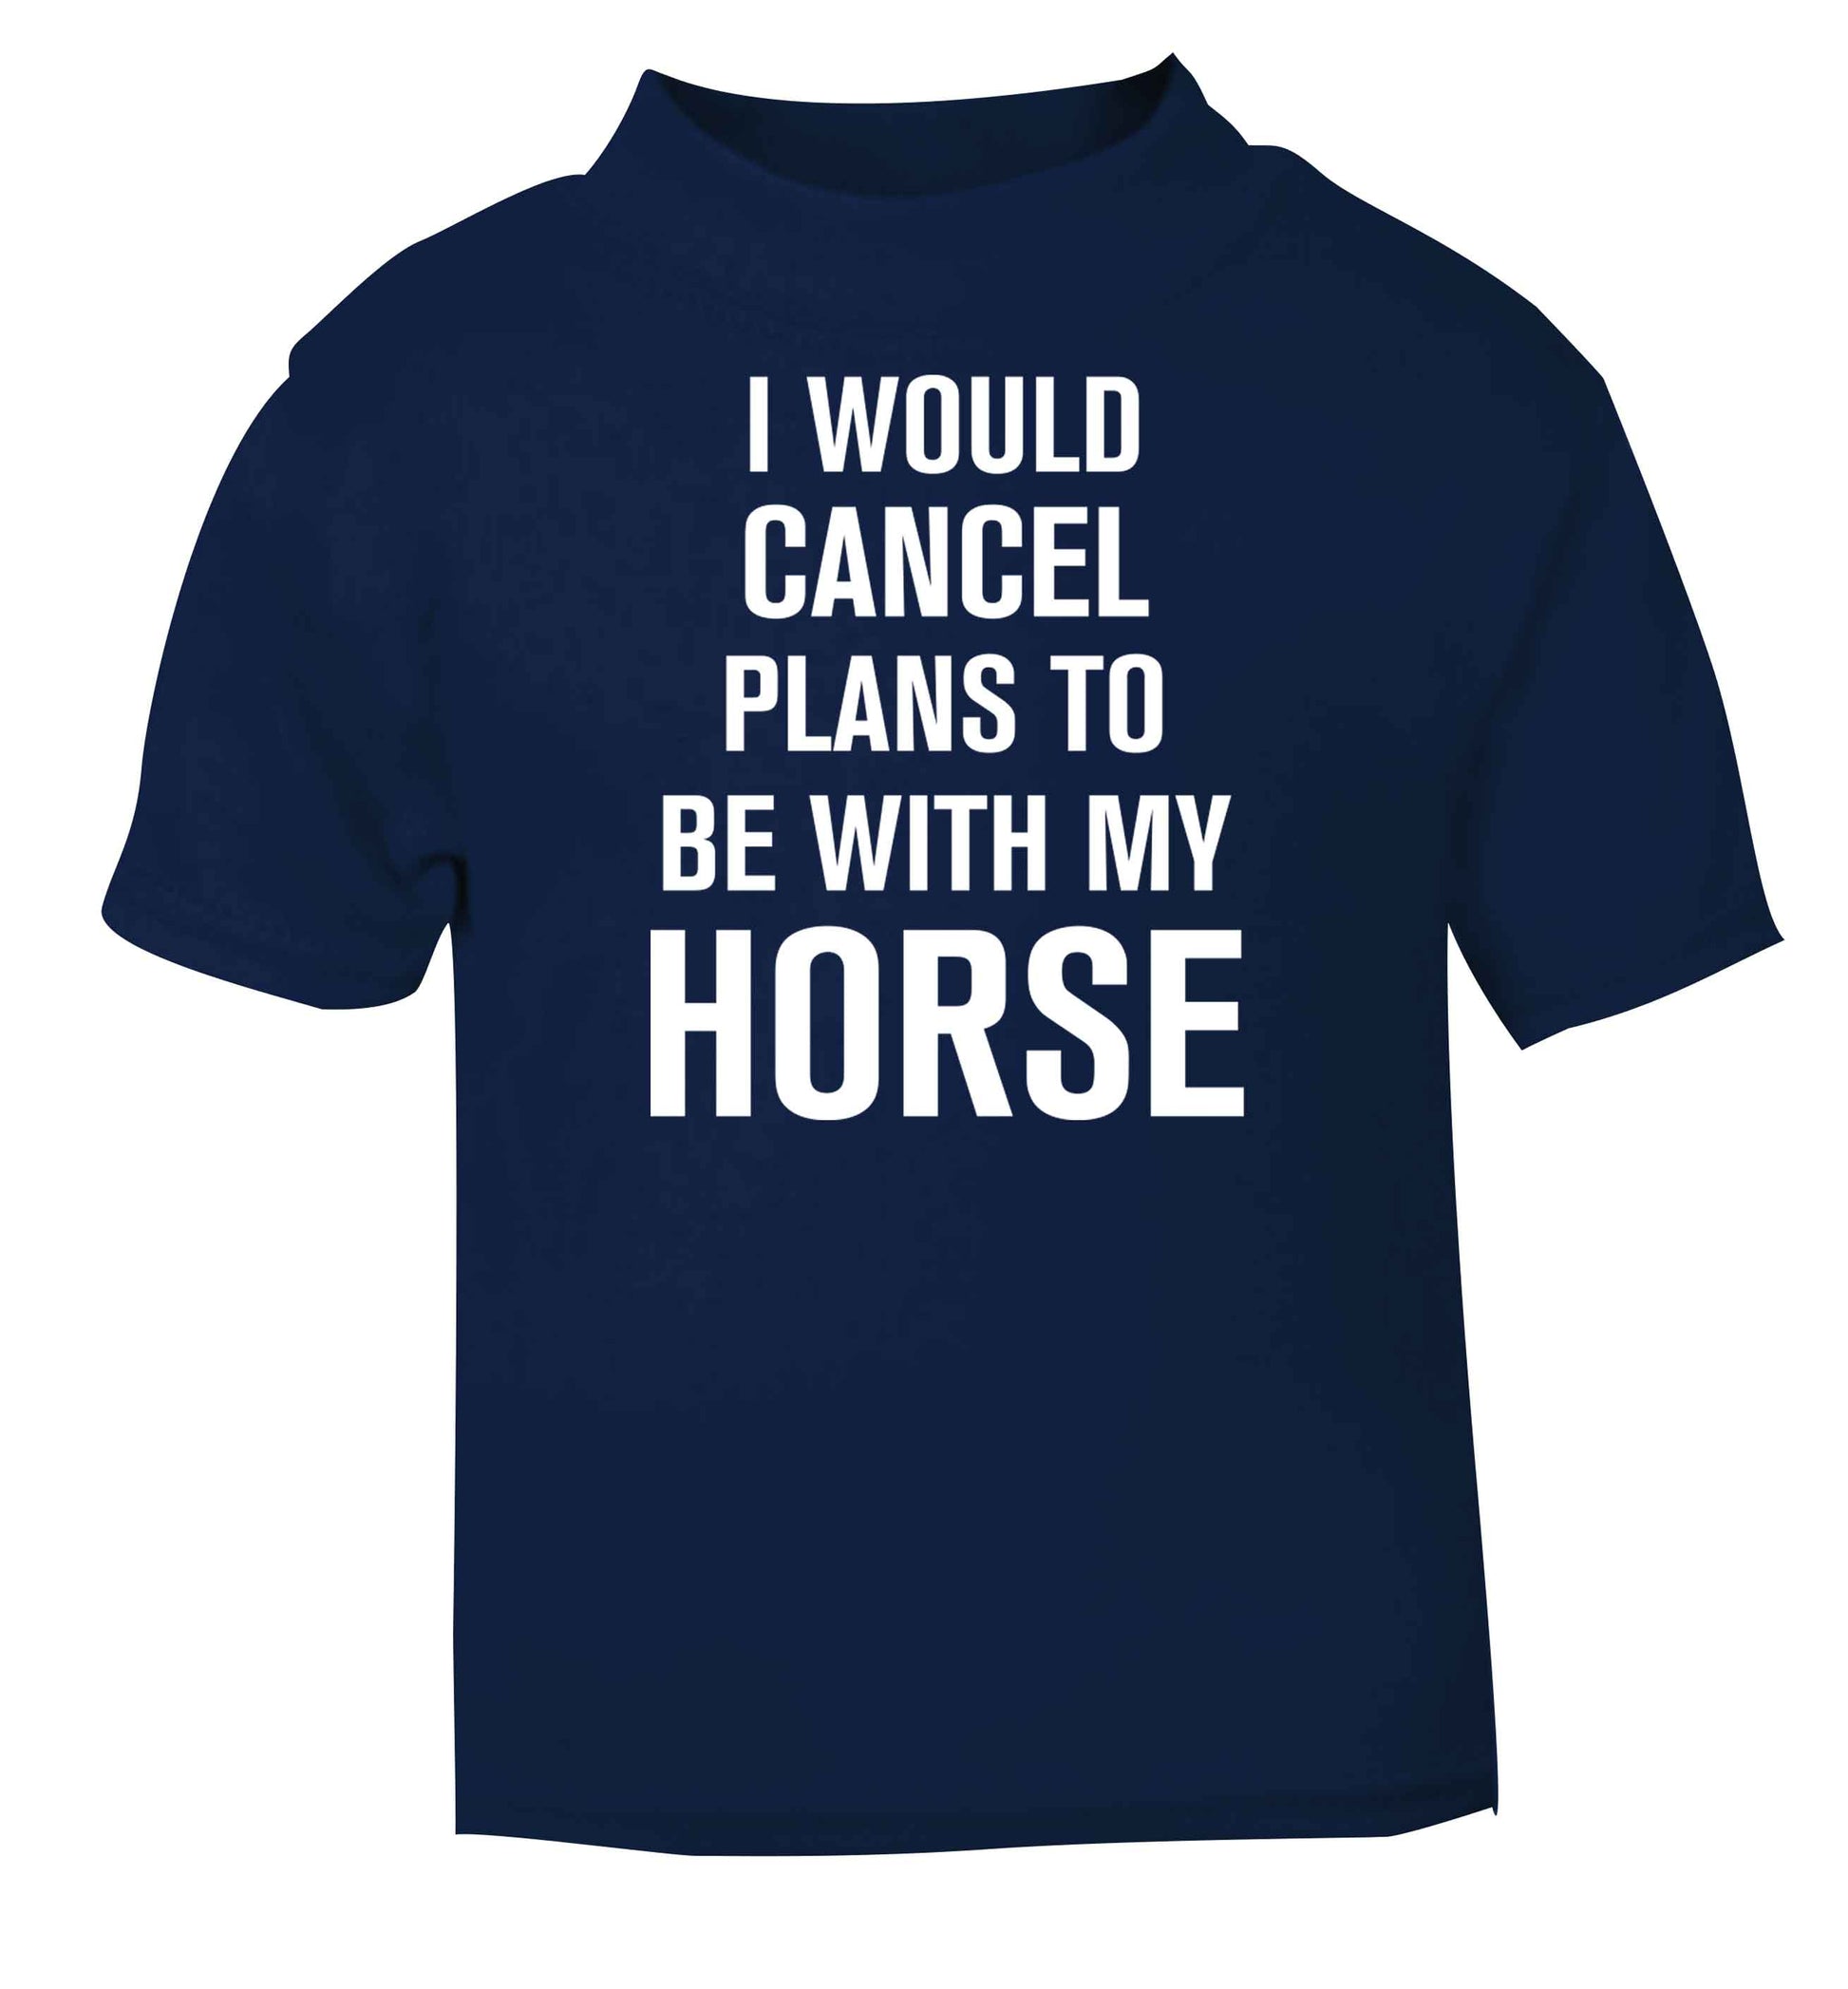 I will cancel plans to be with my horse navy baby toddler Tshirt 2 Years